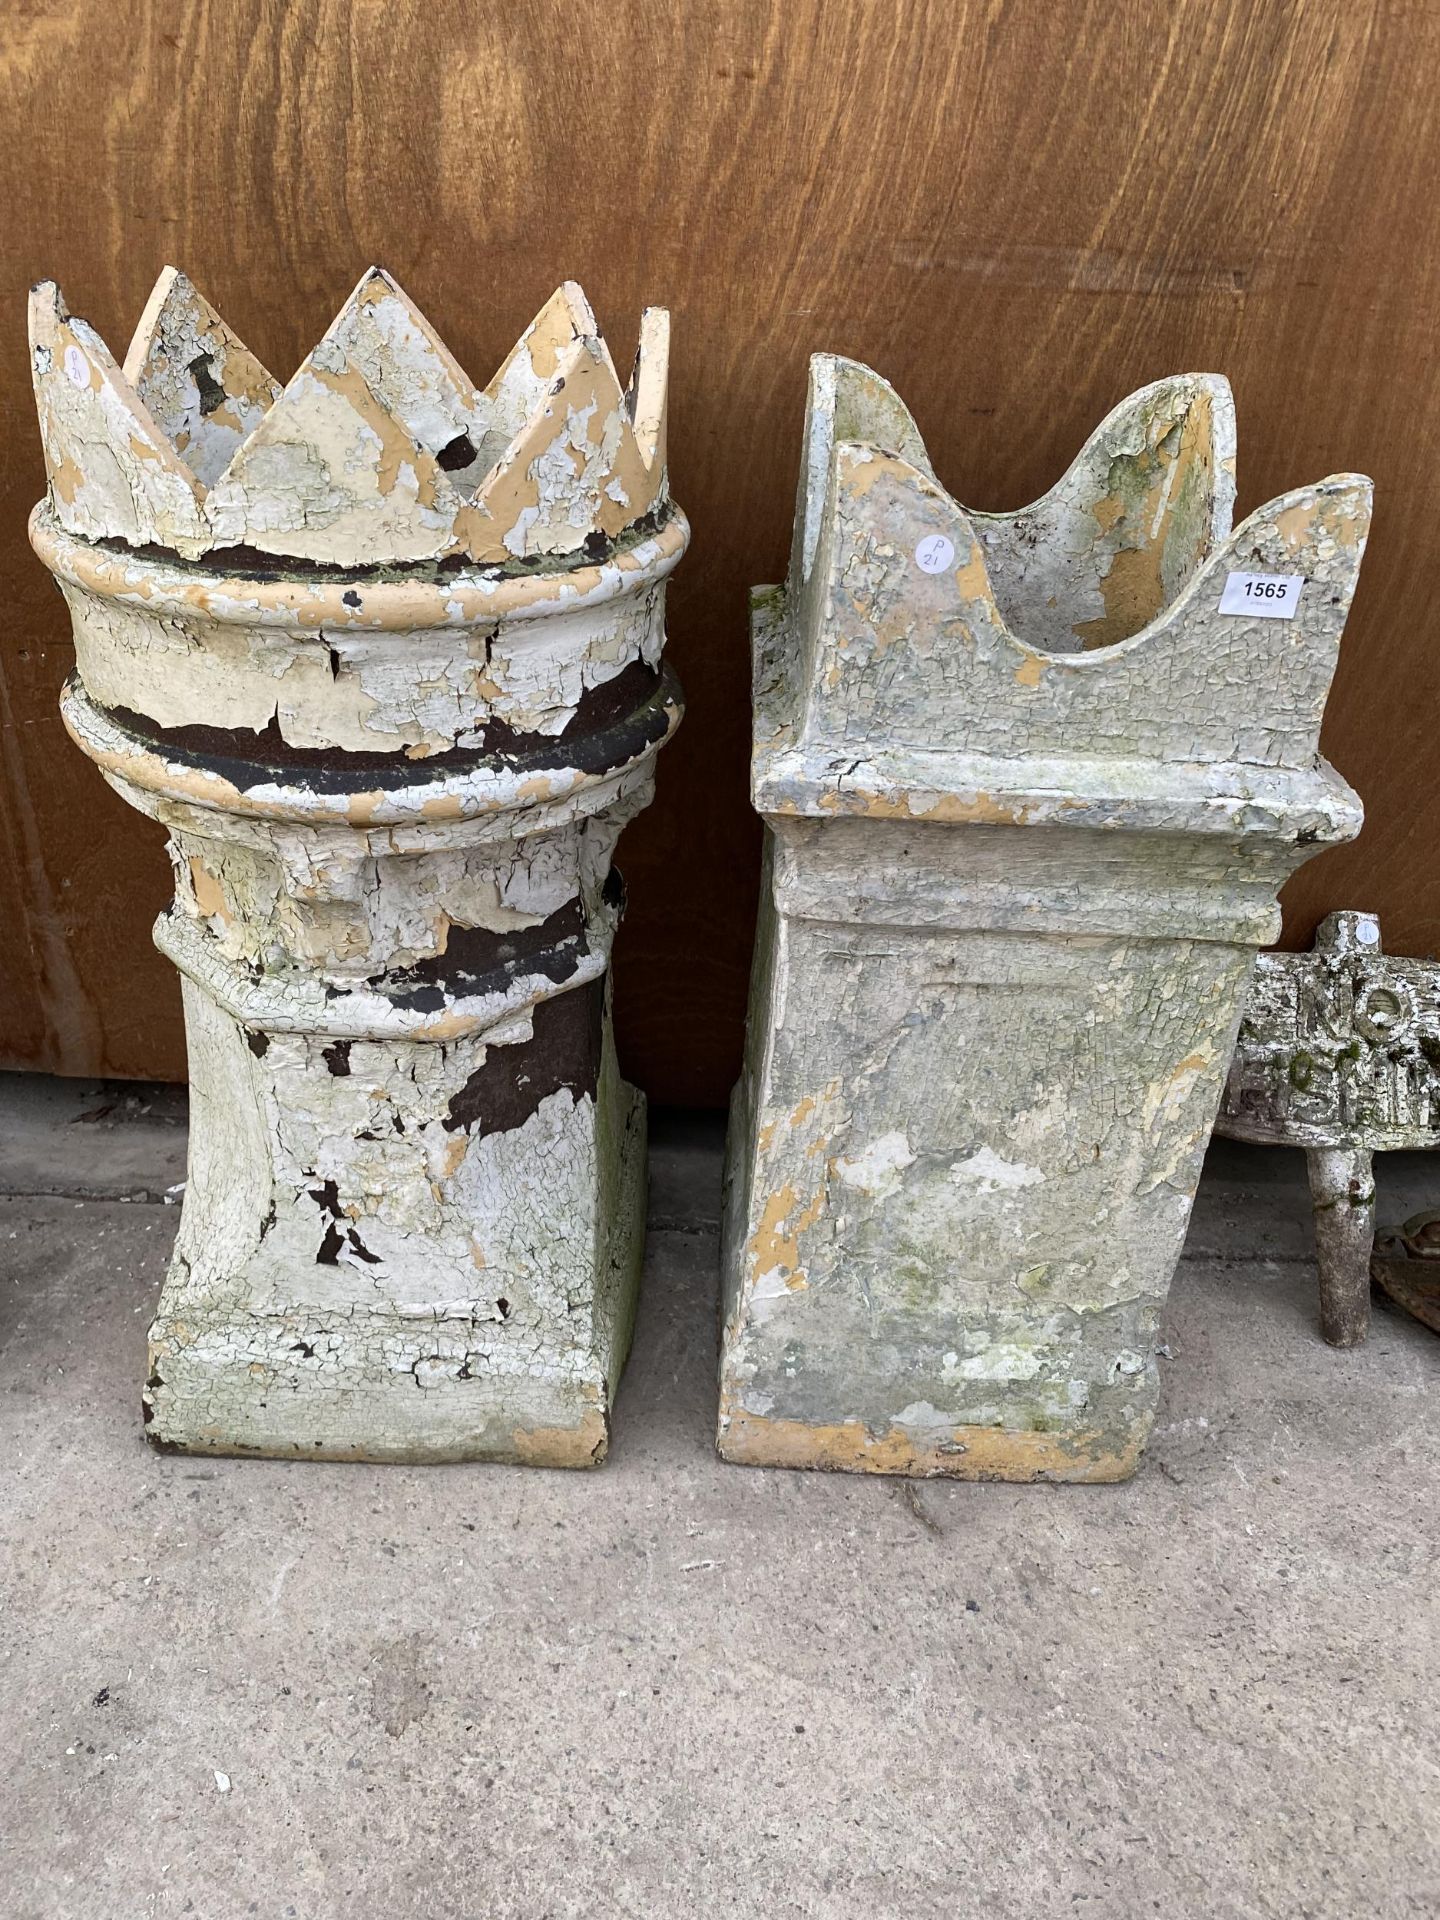 A KINGS CHIMNEY POT AND A FURTHER SQUARE CHIMNEY POT